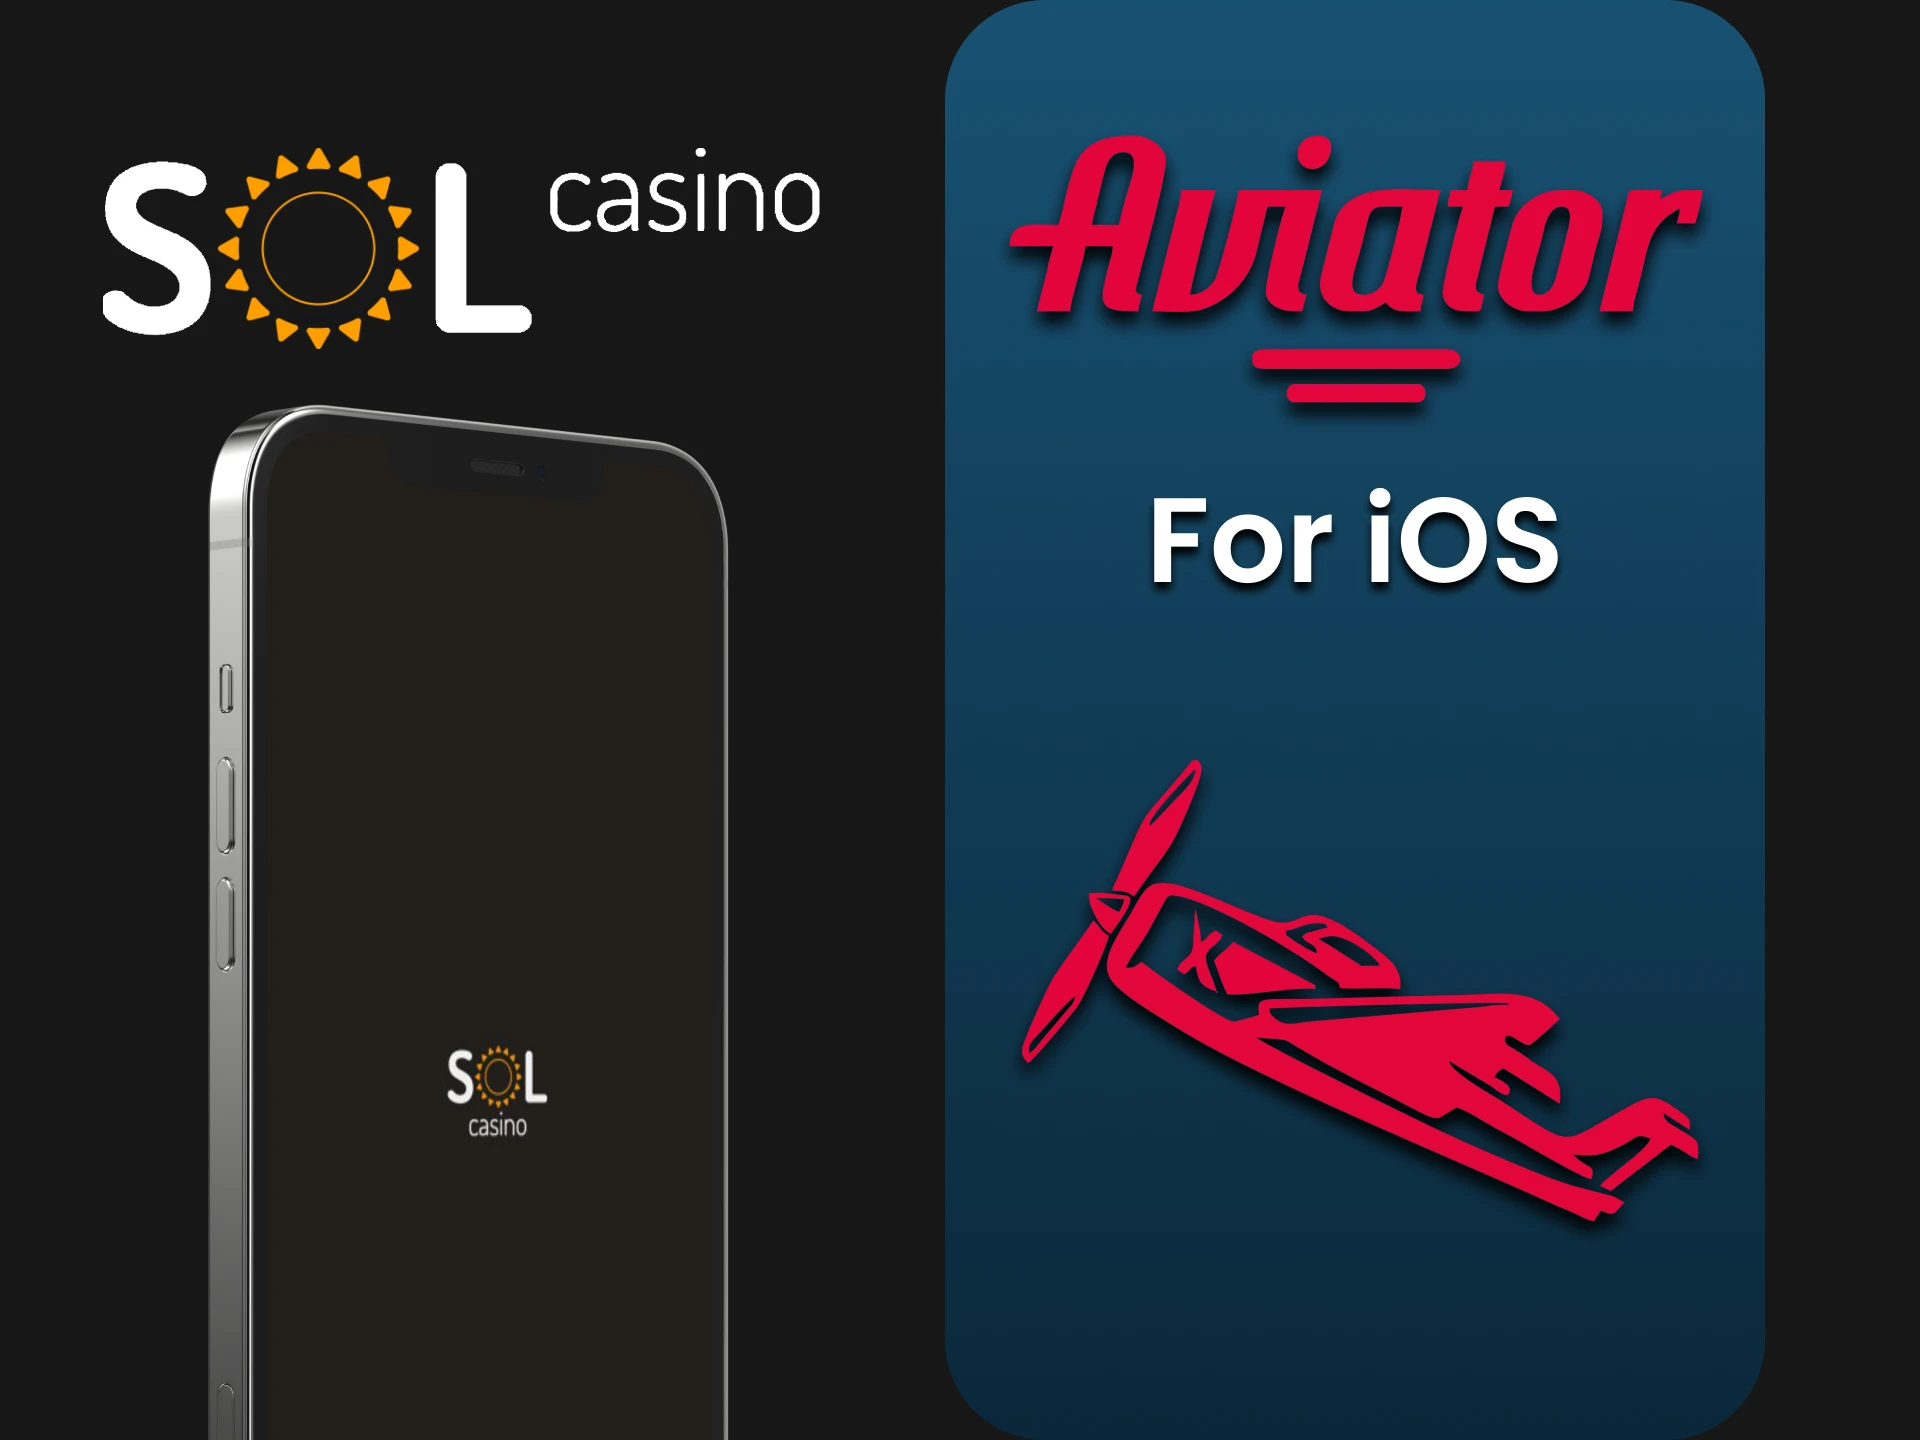 Download the Sol Casino app to play Aviator on iOS.